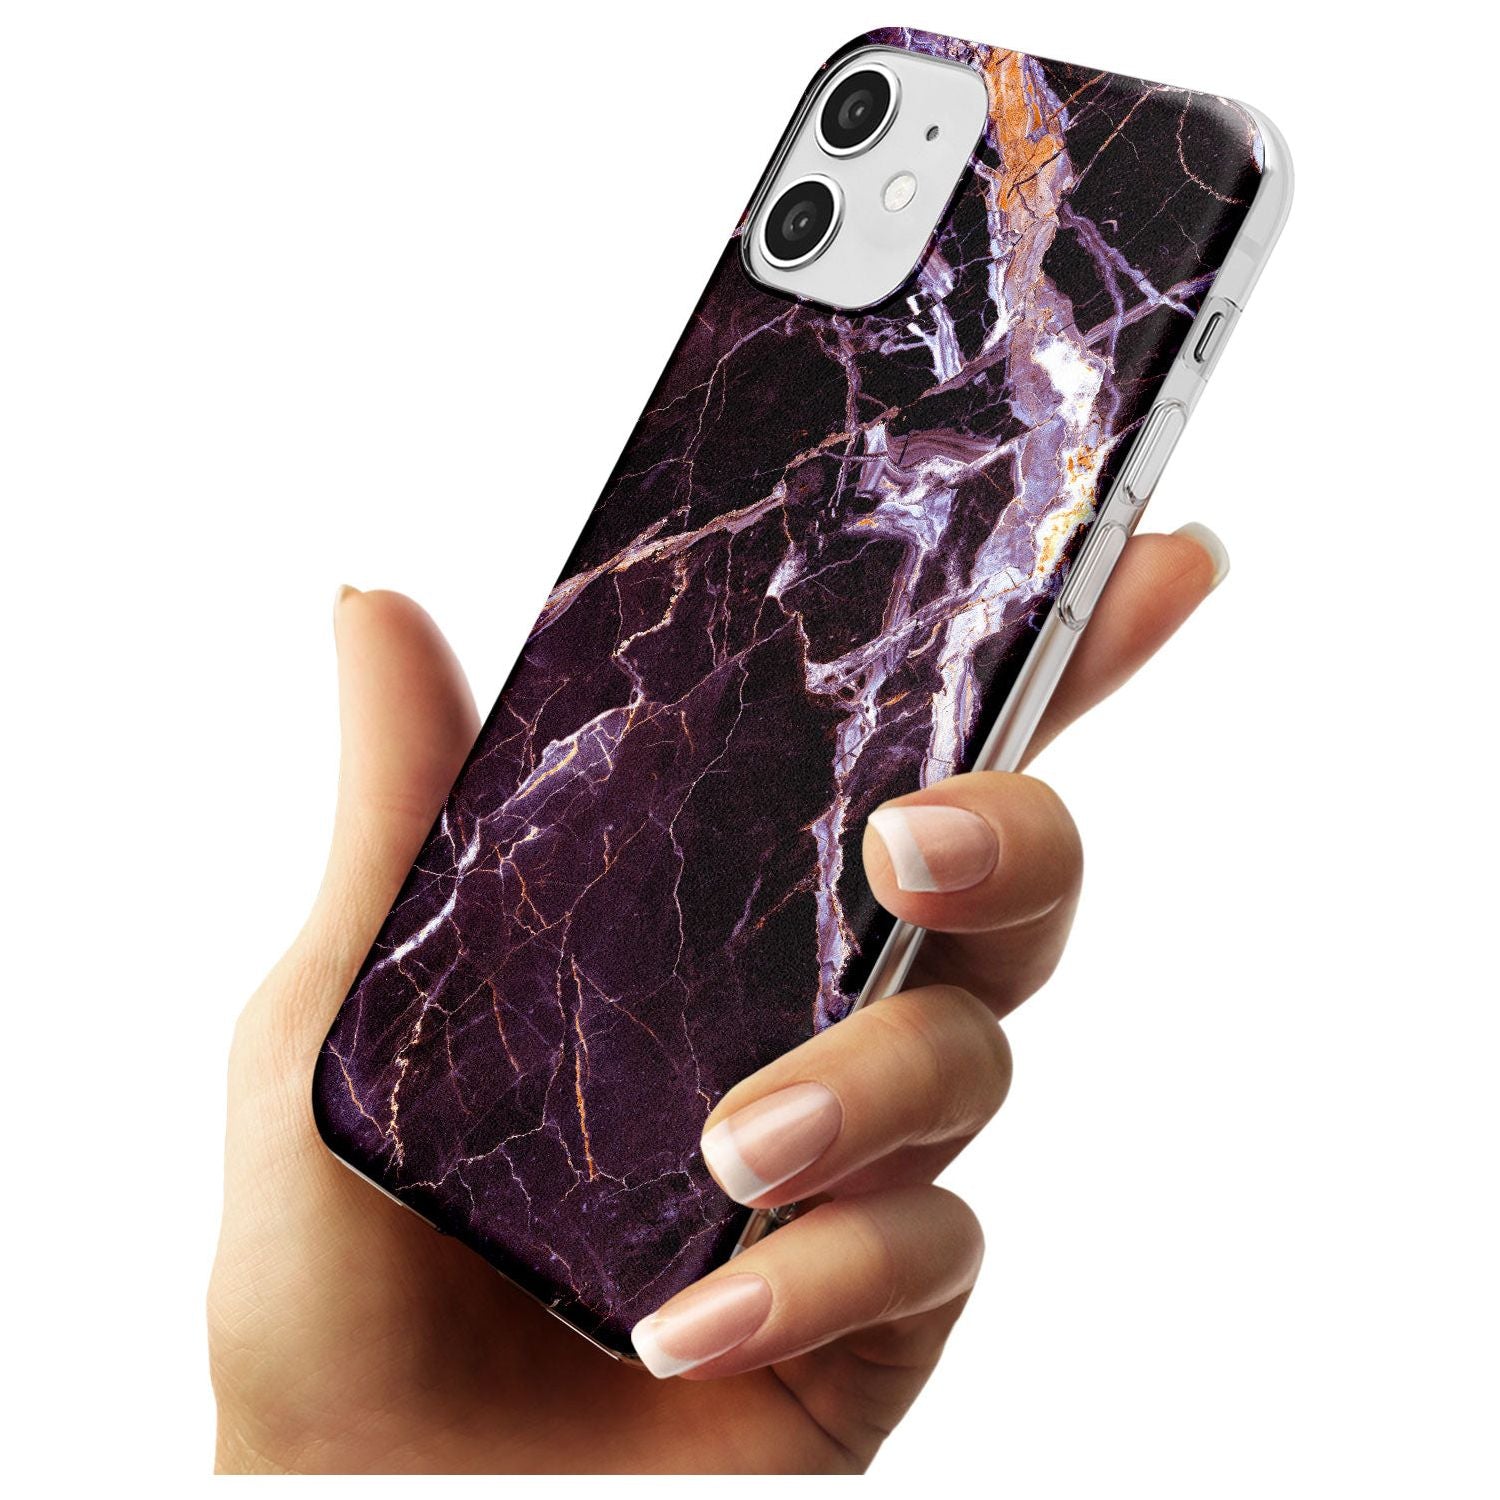 Black, Purple & Yellow shattered Marble Slim TPU Phone Case for iPhone 11